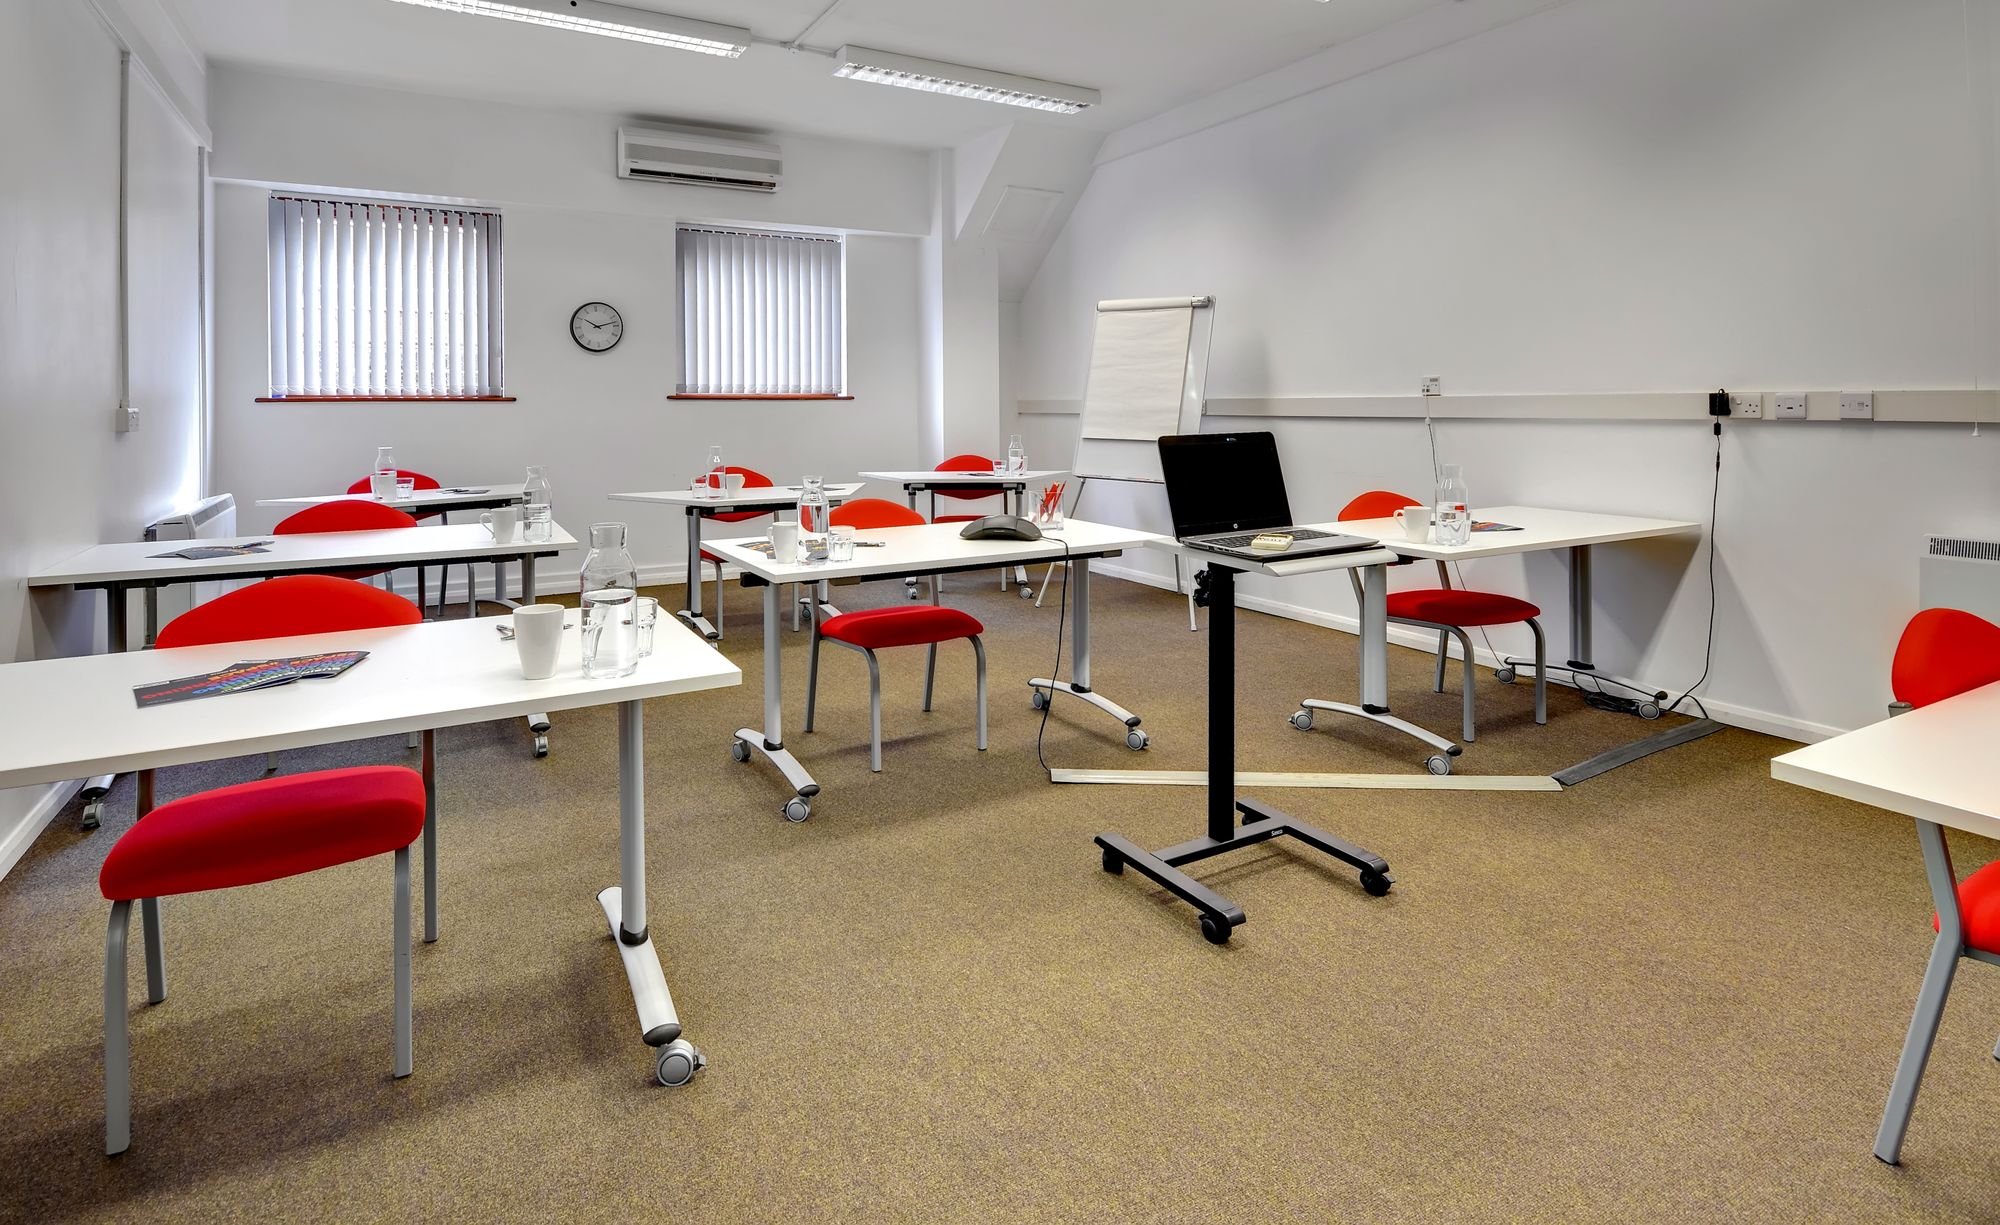 MENTA lecture and training room